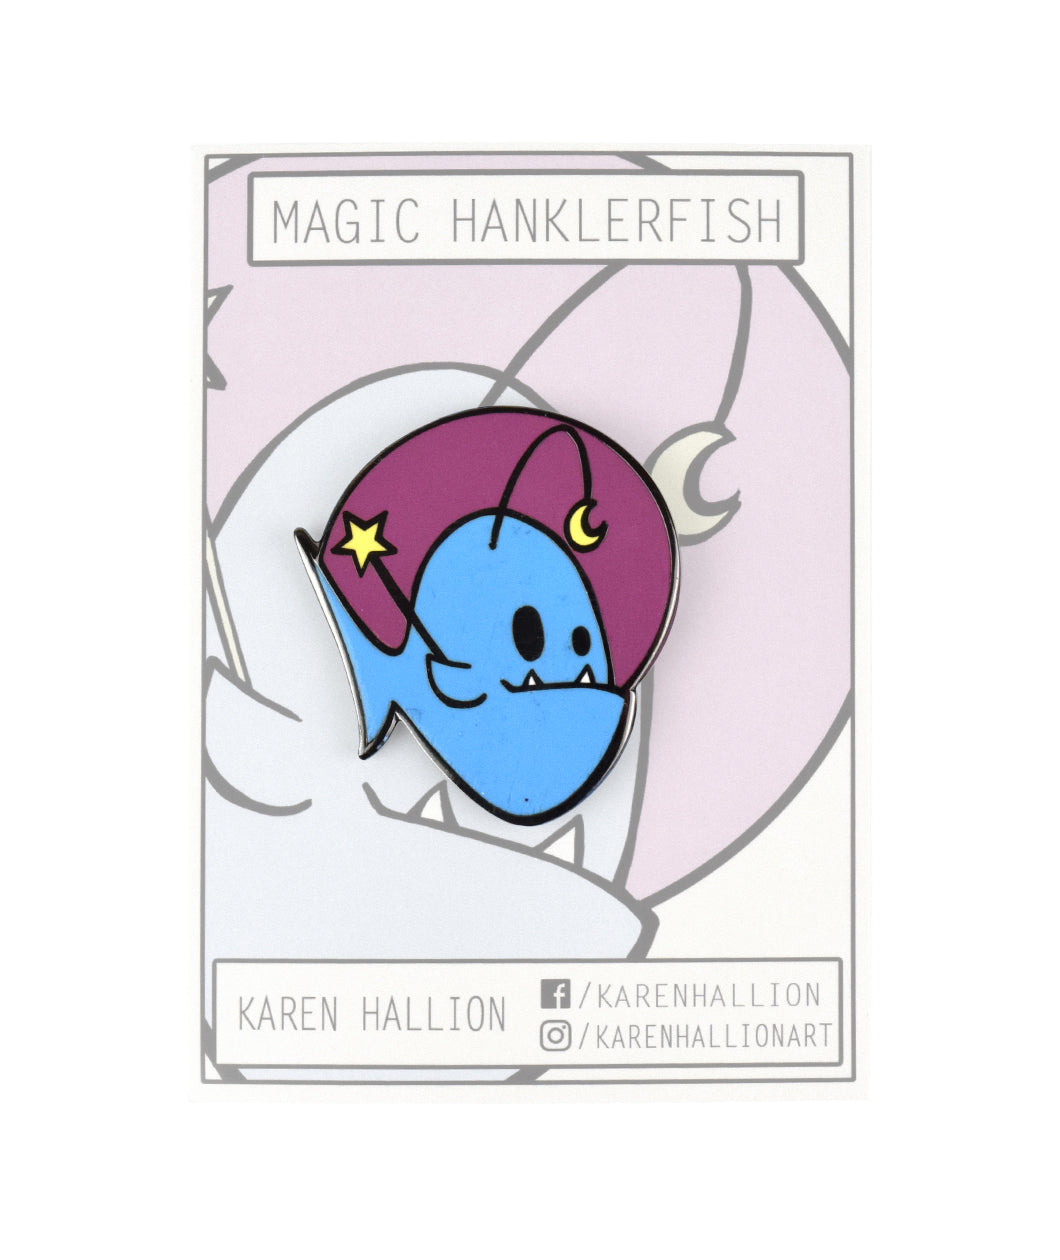 A magic Hanklerfish pin on a grey backing card. The pin is a purple circle with a blue hanklerfish inside holding a baton with a star. From Karen Hallion.